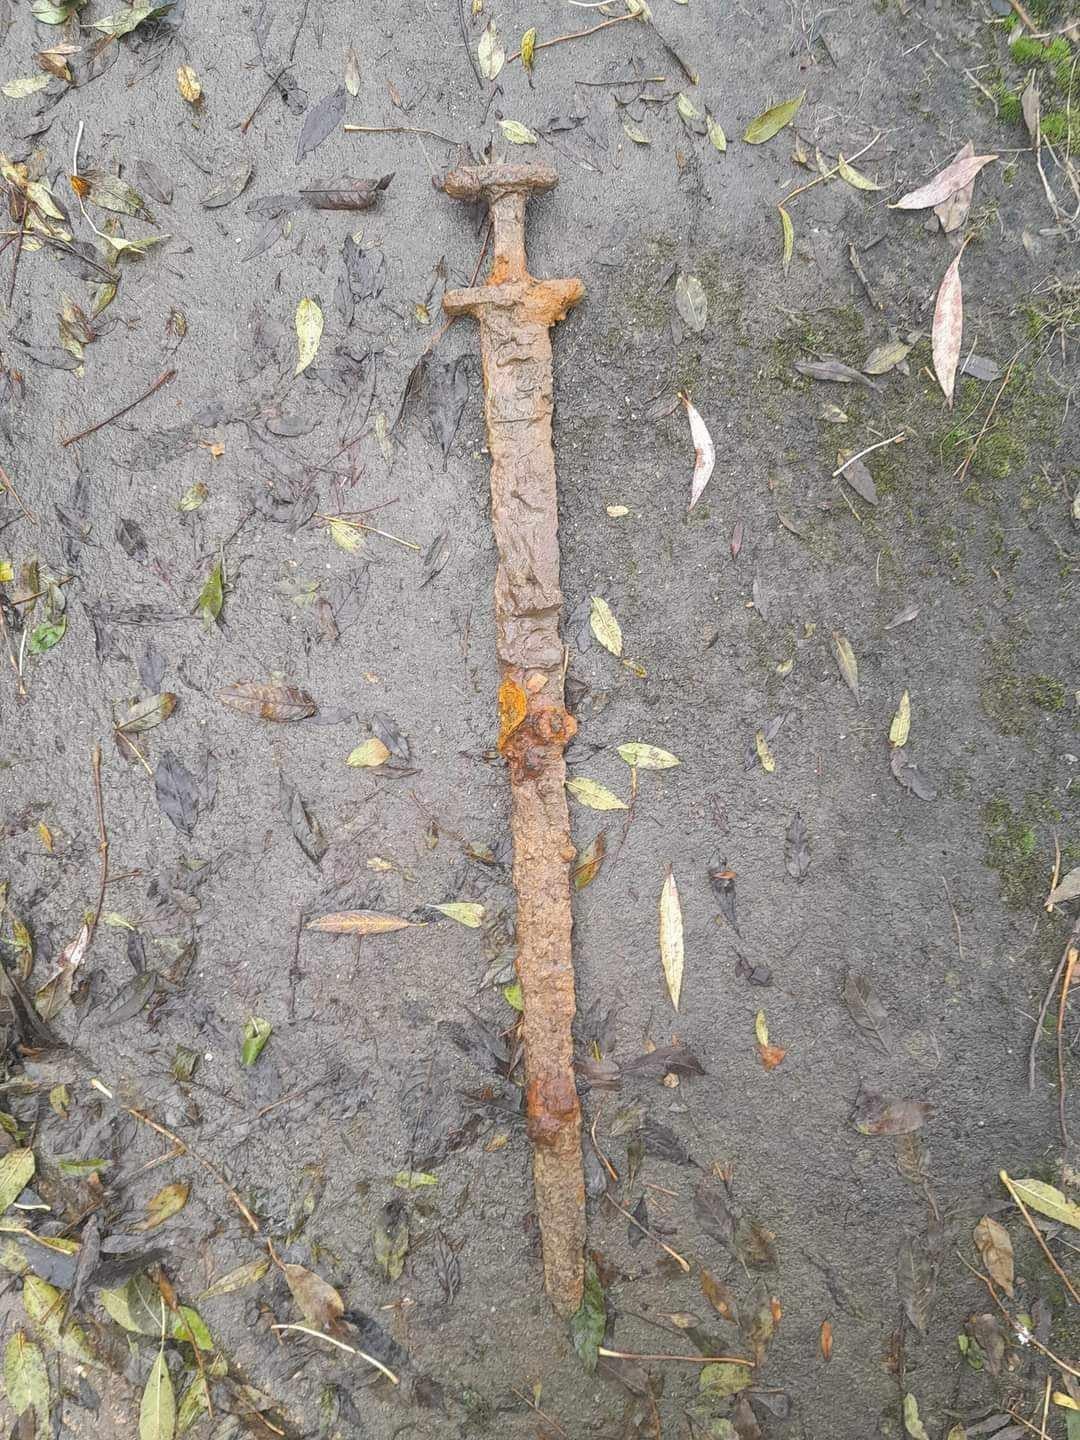 The 1,100-year-old sword was found in the River Cherwell